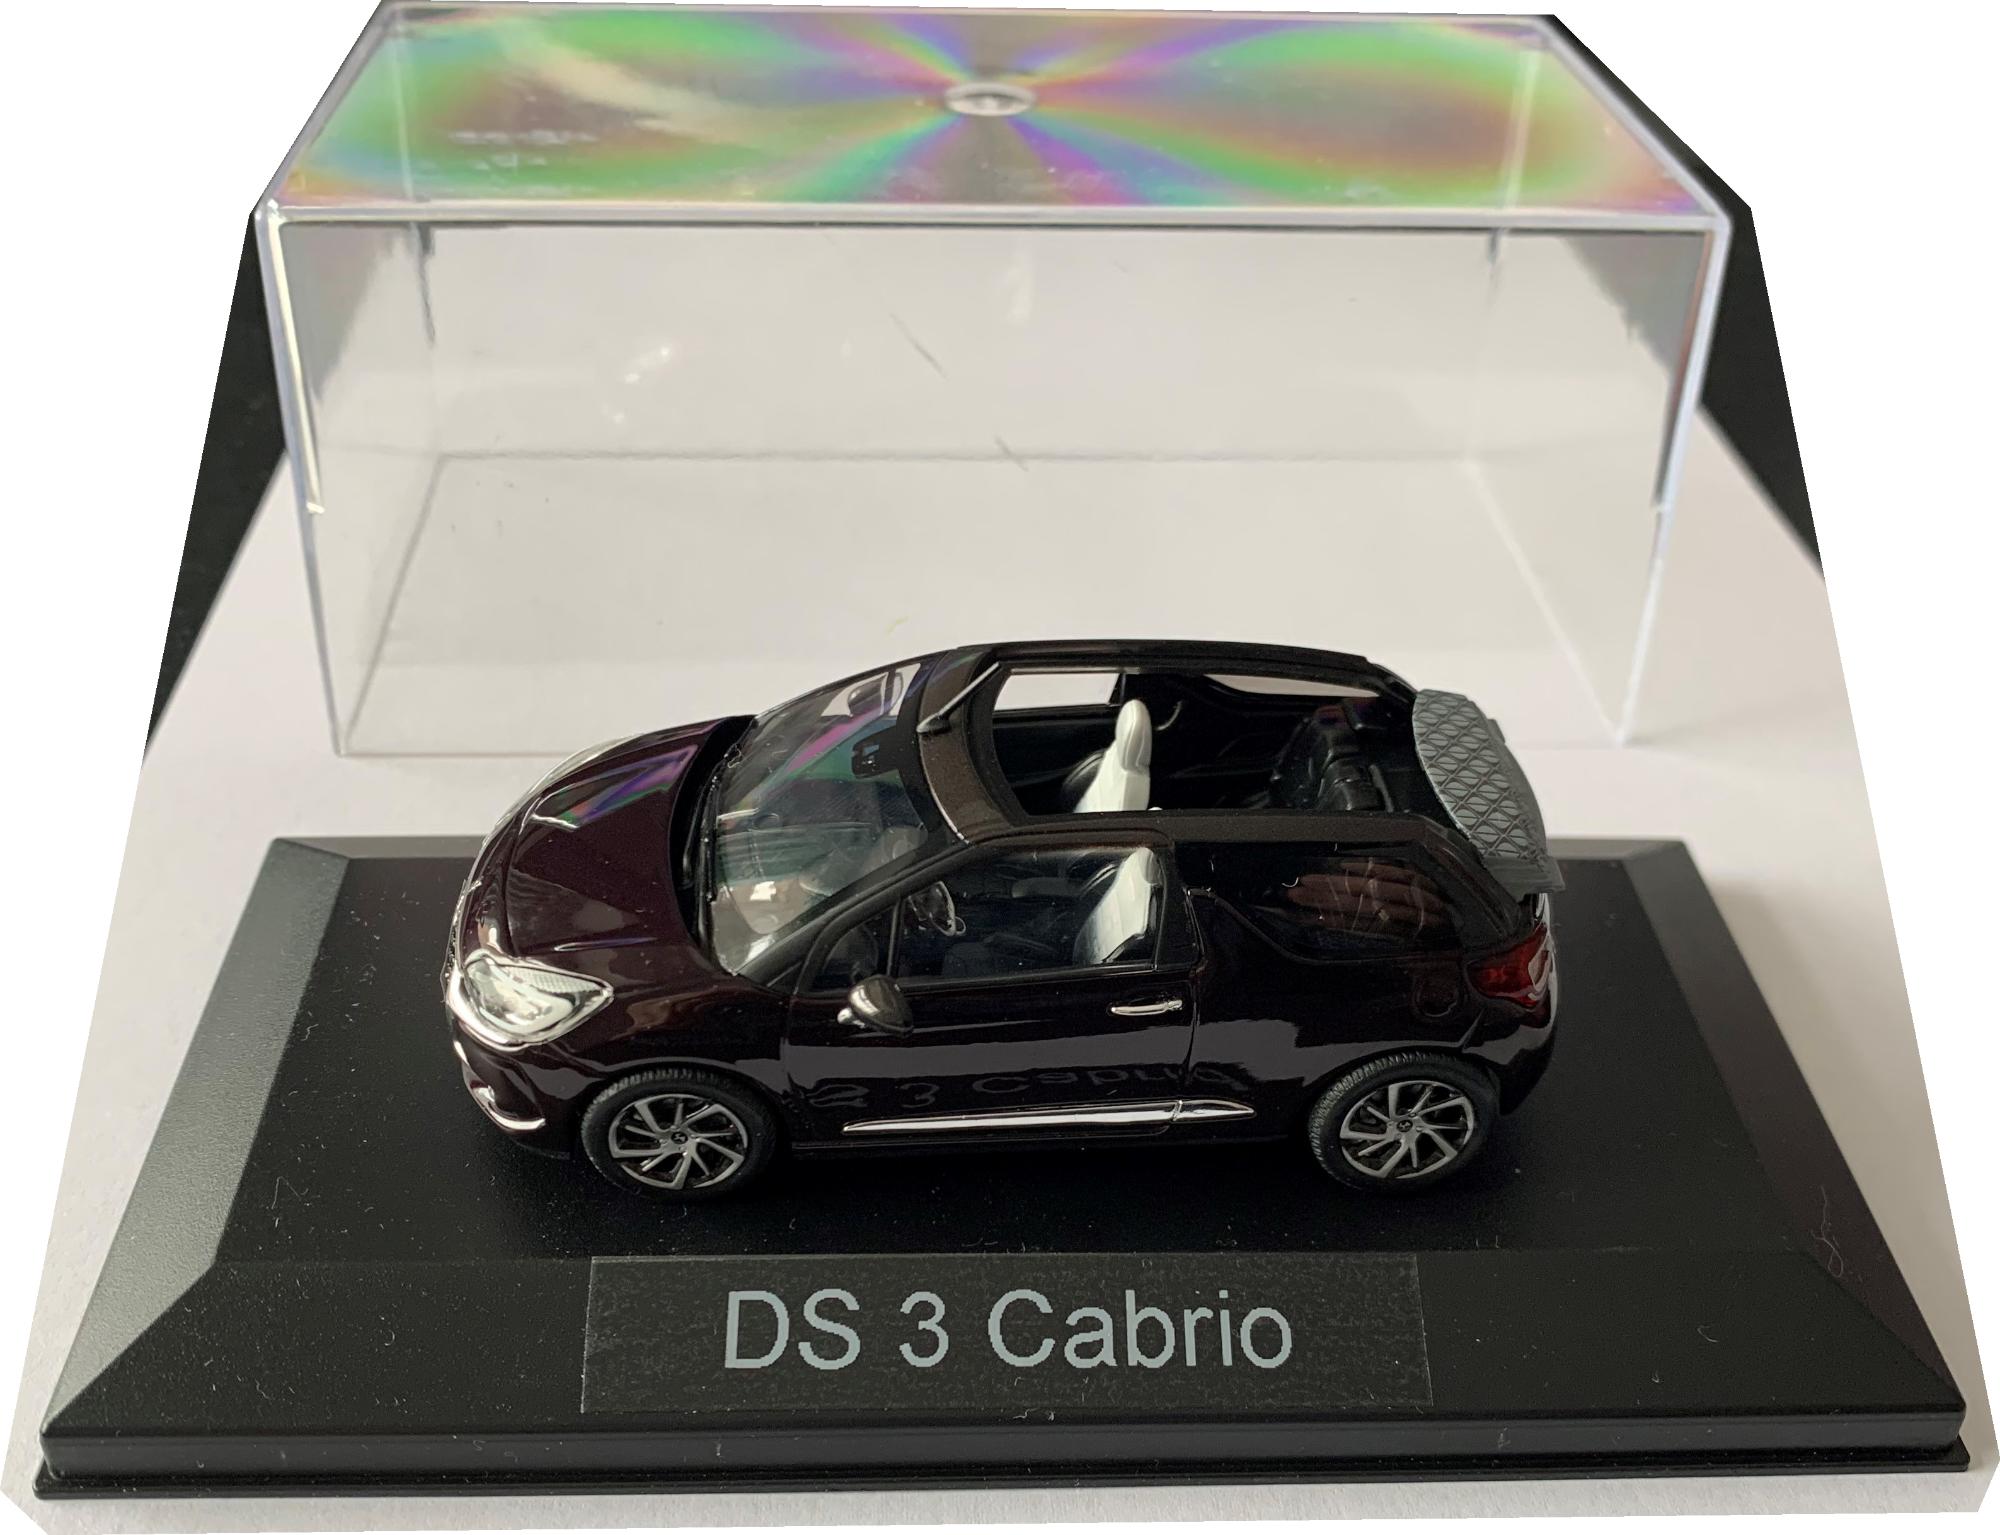 Citroen DS3 Cabriolet 2016 in whisper purple and brown 1:43 scale diecast model